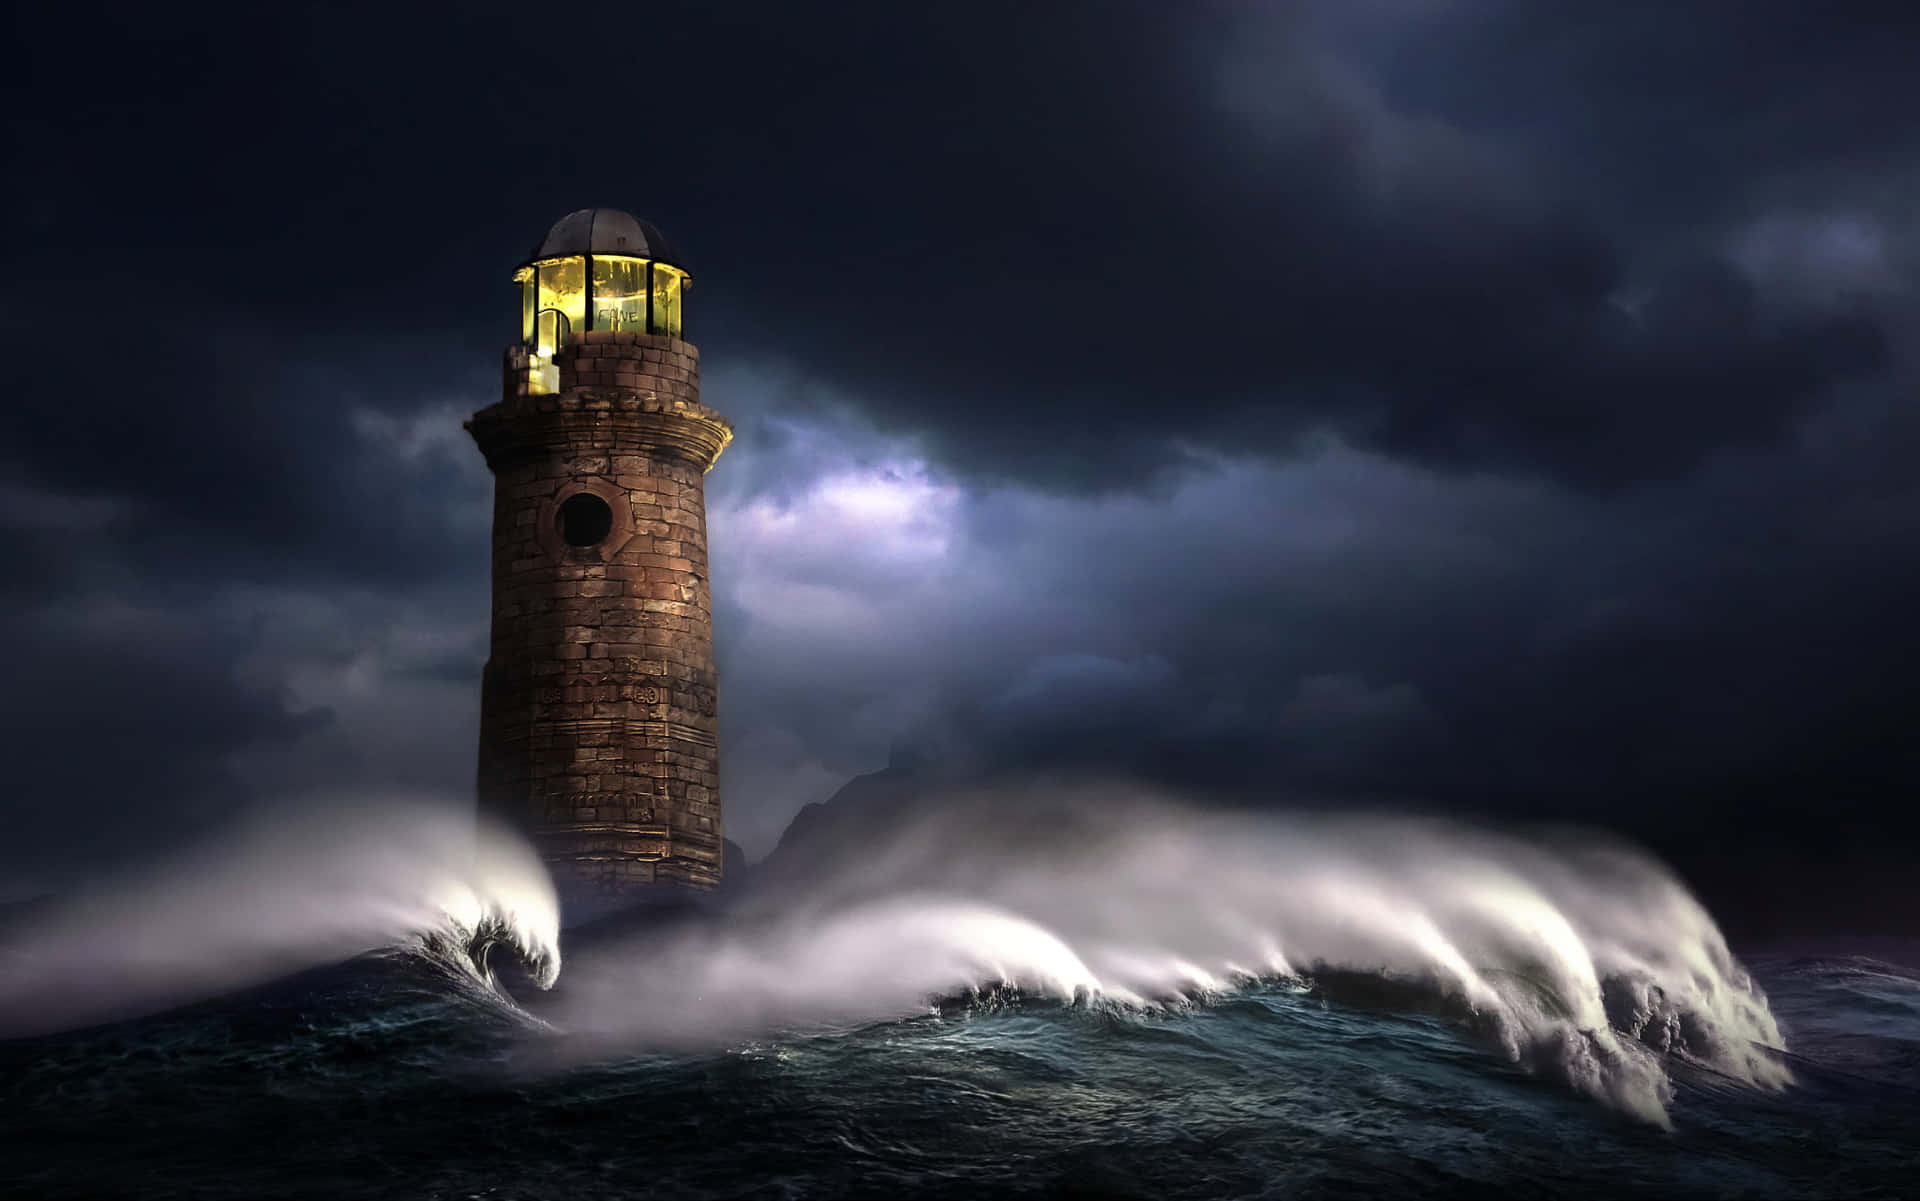 The beautiful view of a lighthouse lit up in the night sky.